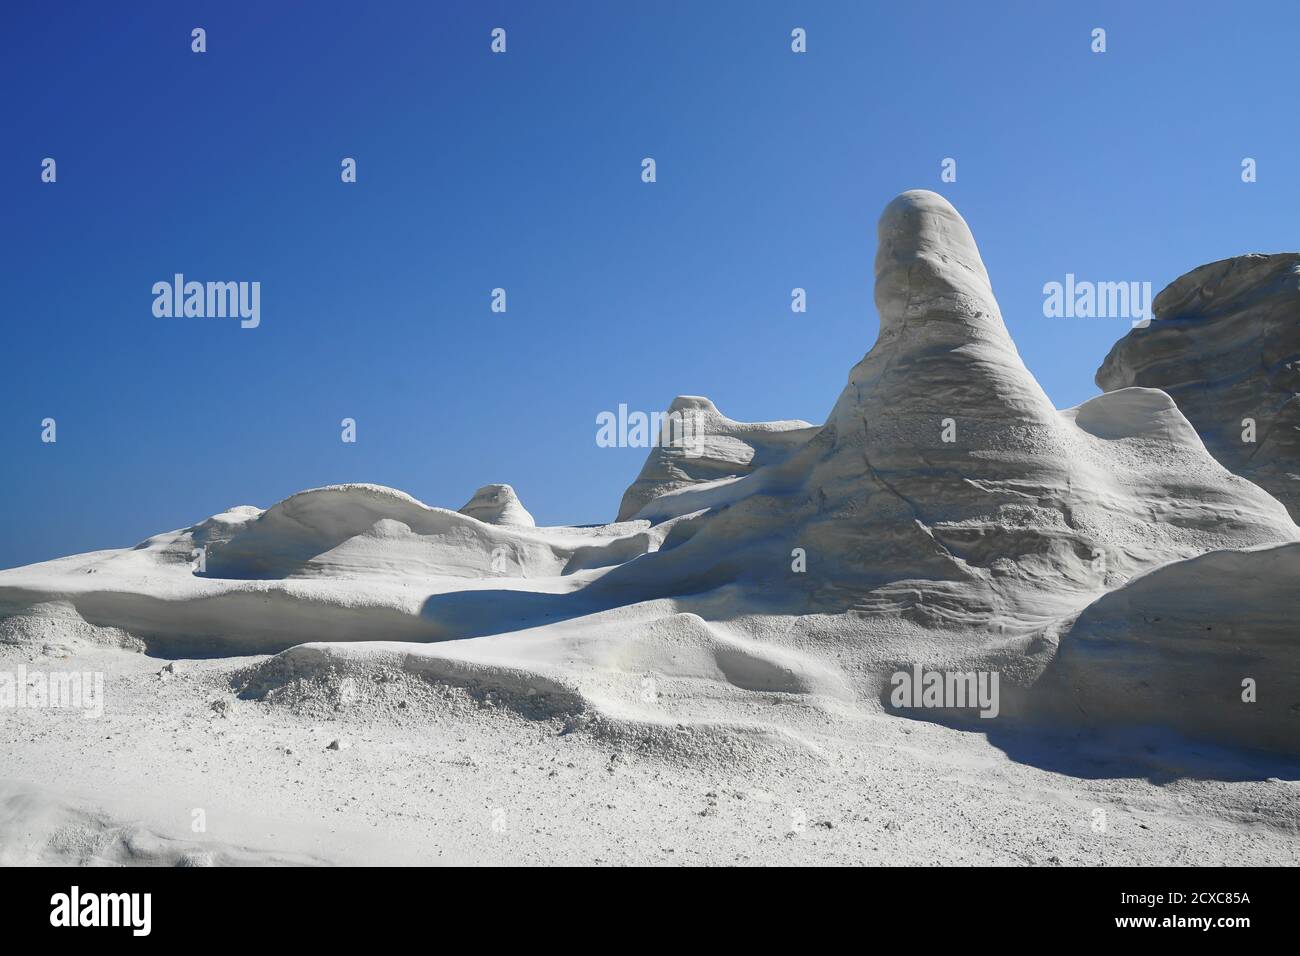 Otherworldly rock formations and landscape at Sarakiniko beach in Milos, Greece Stock Photo